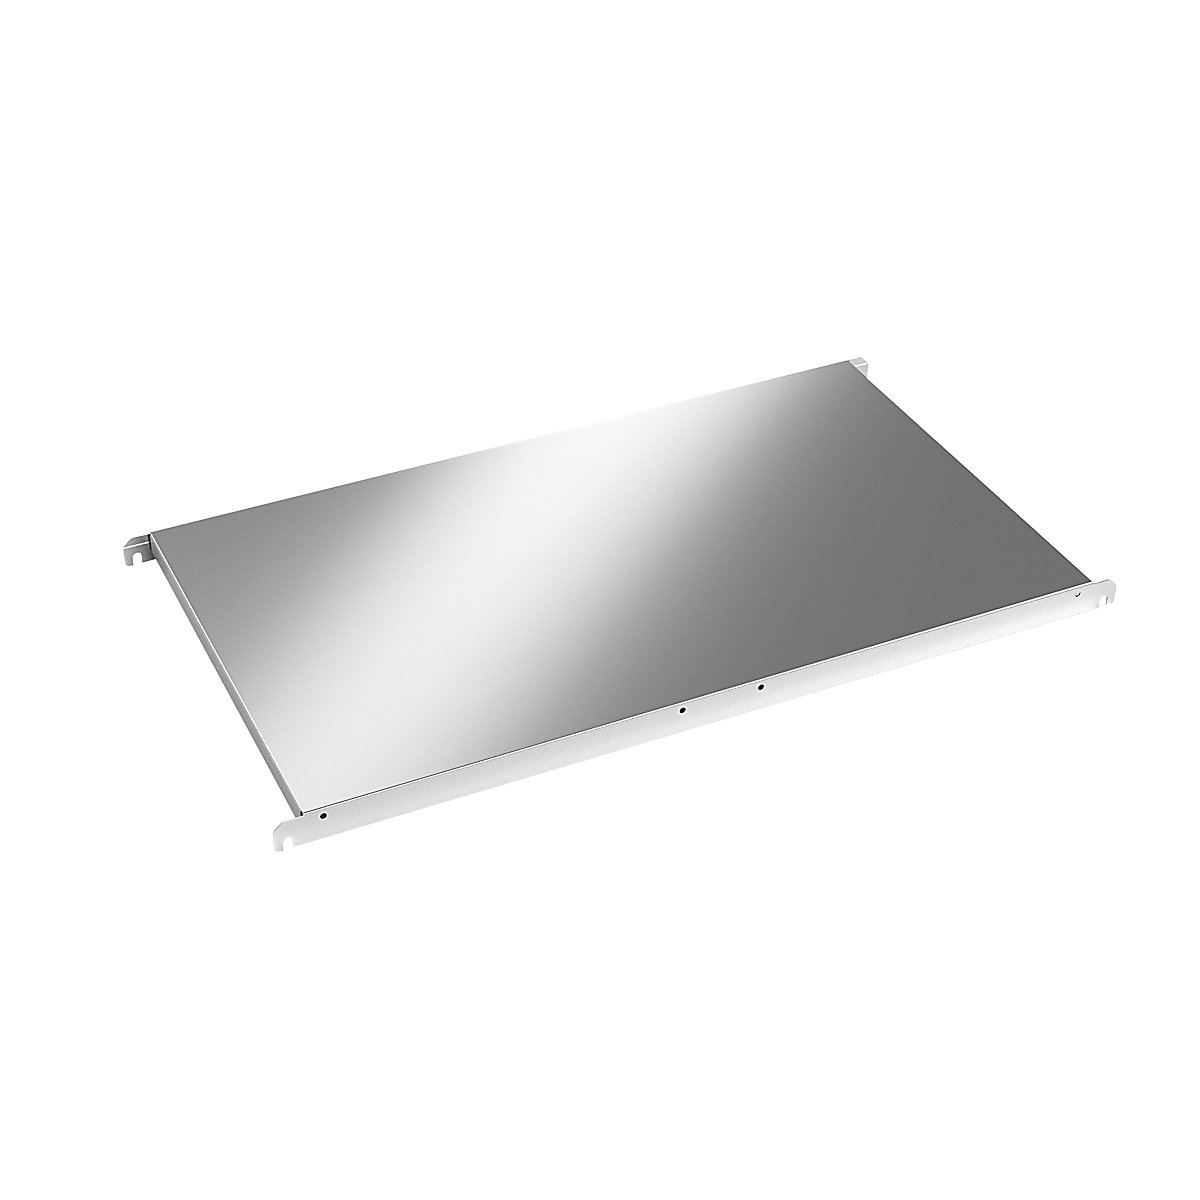 Stainless steel shelf, solid, WxD 940 x 540 mm